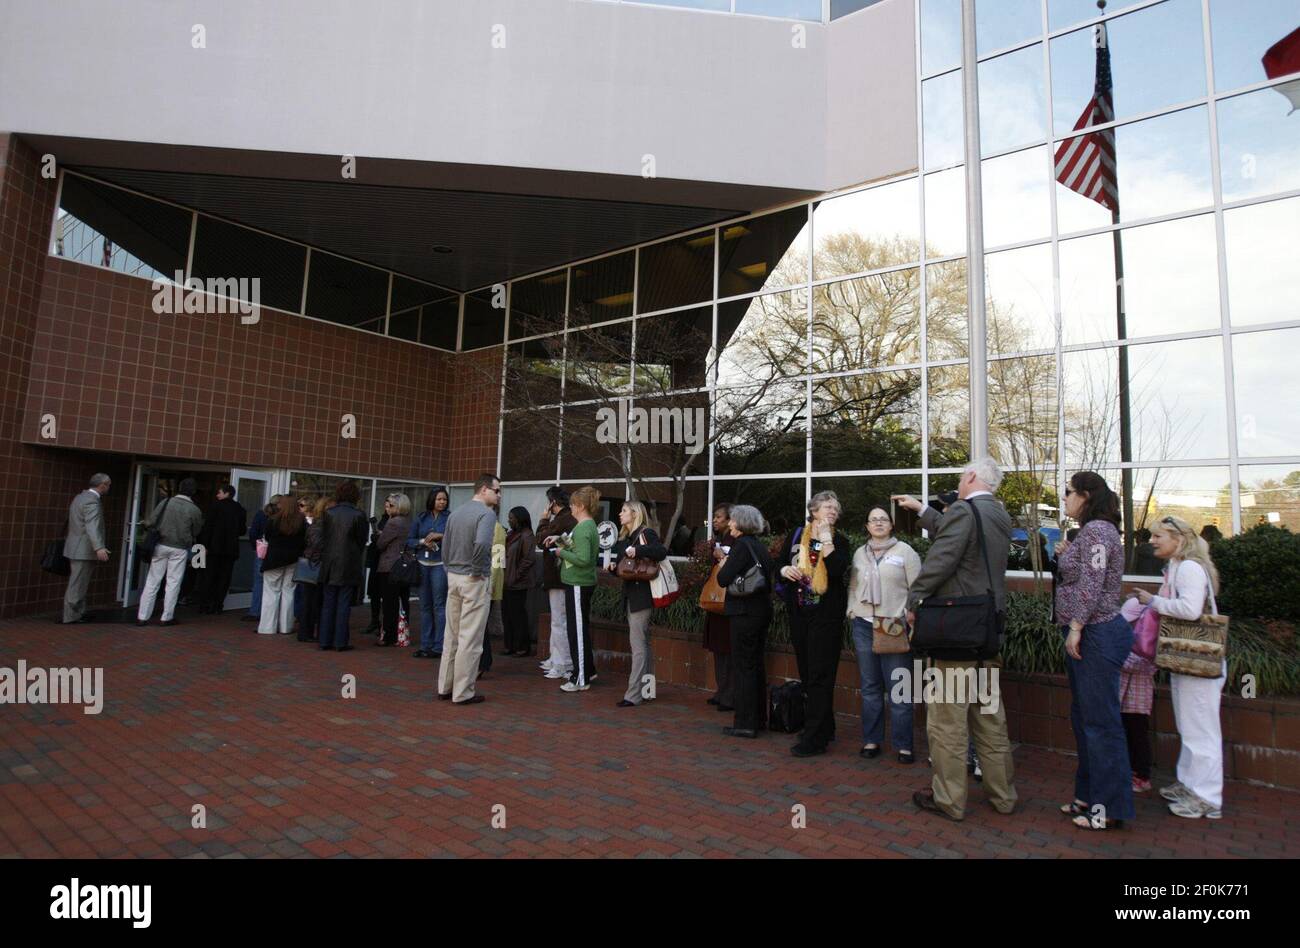 People line up outside the Wake County School Administration Building Tuesday, March 23, 2010 in Raleigh, North Carolina. During a tense marathon meeting, the Wake County school board voted to stop busing students for diversity, then cemented that action by taking the first steps toward a community-based system of student assignment. (Photo by Takaaki Iwabu/Raleigh News &amp; Observer/MCT/Sipa USA) Stock Photo